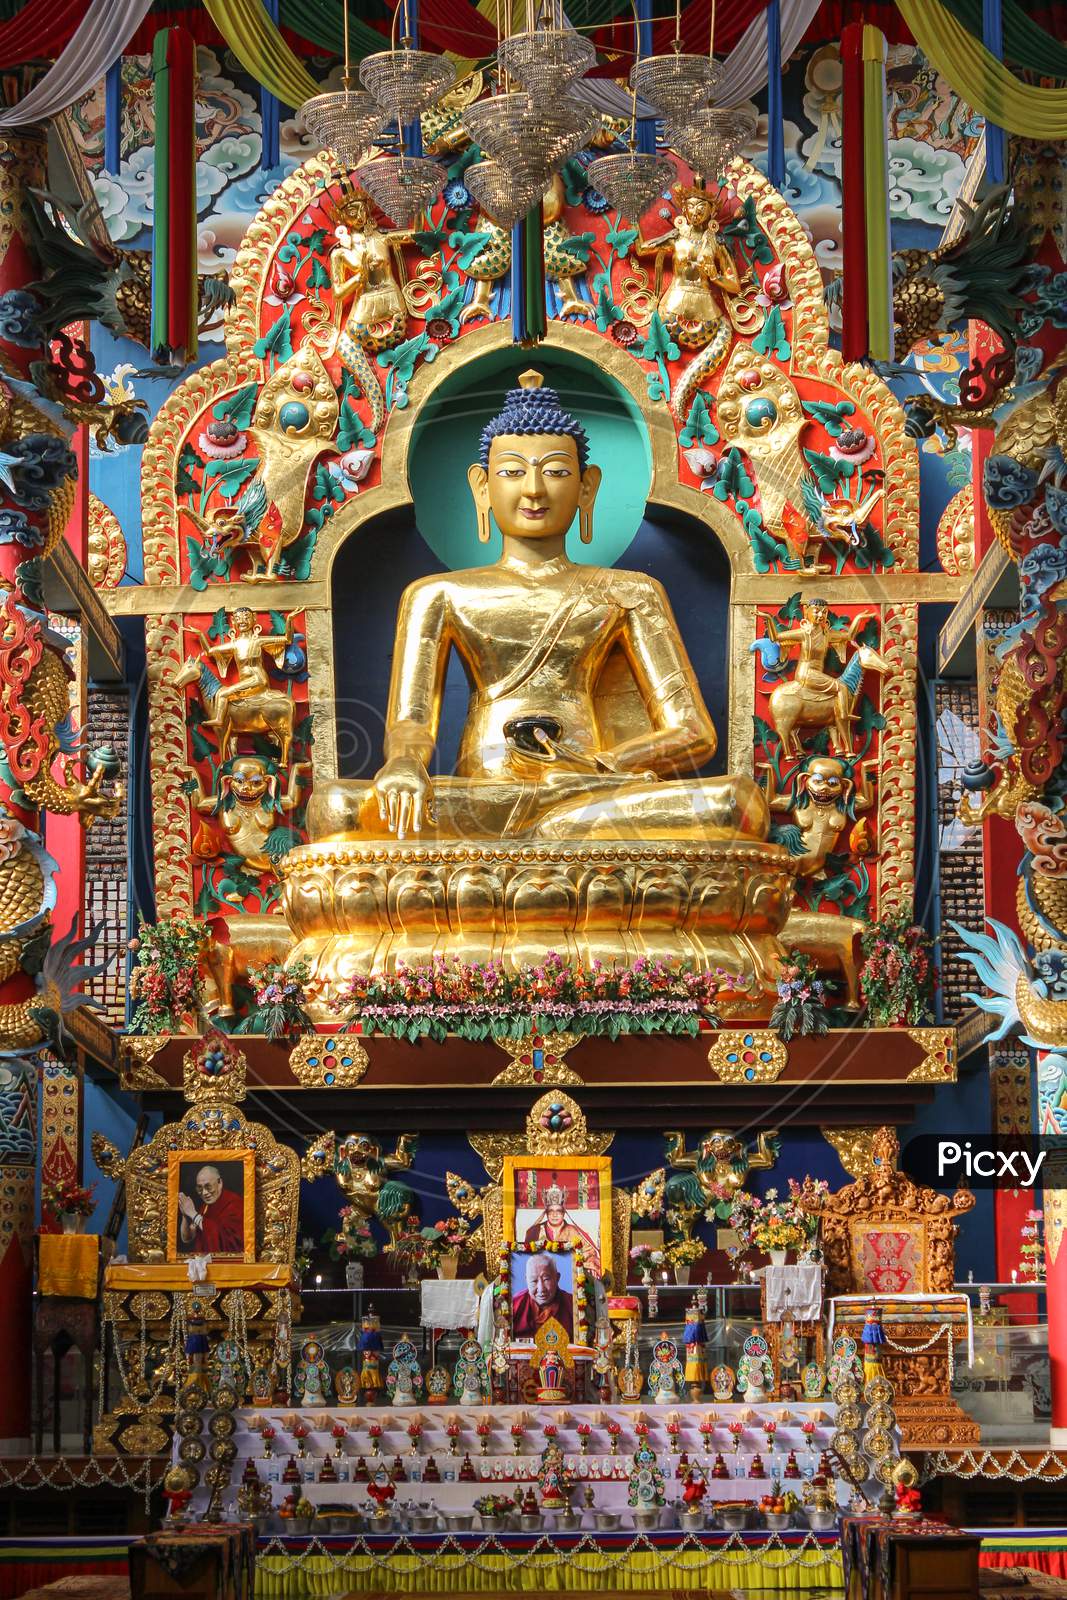 The Golden Buddha Statue at Bylukoppa town in Coorg district of Karnataka/India.